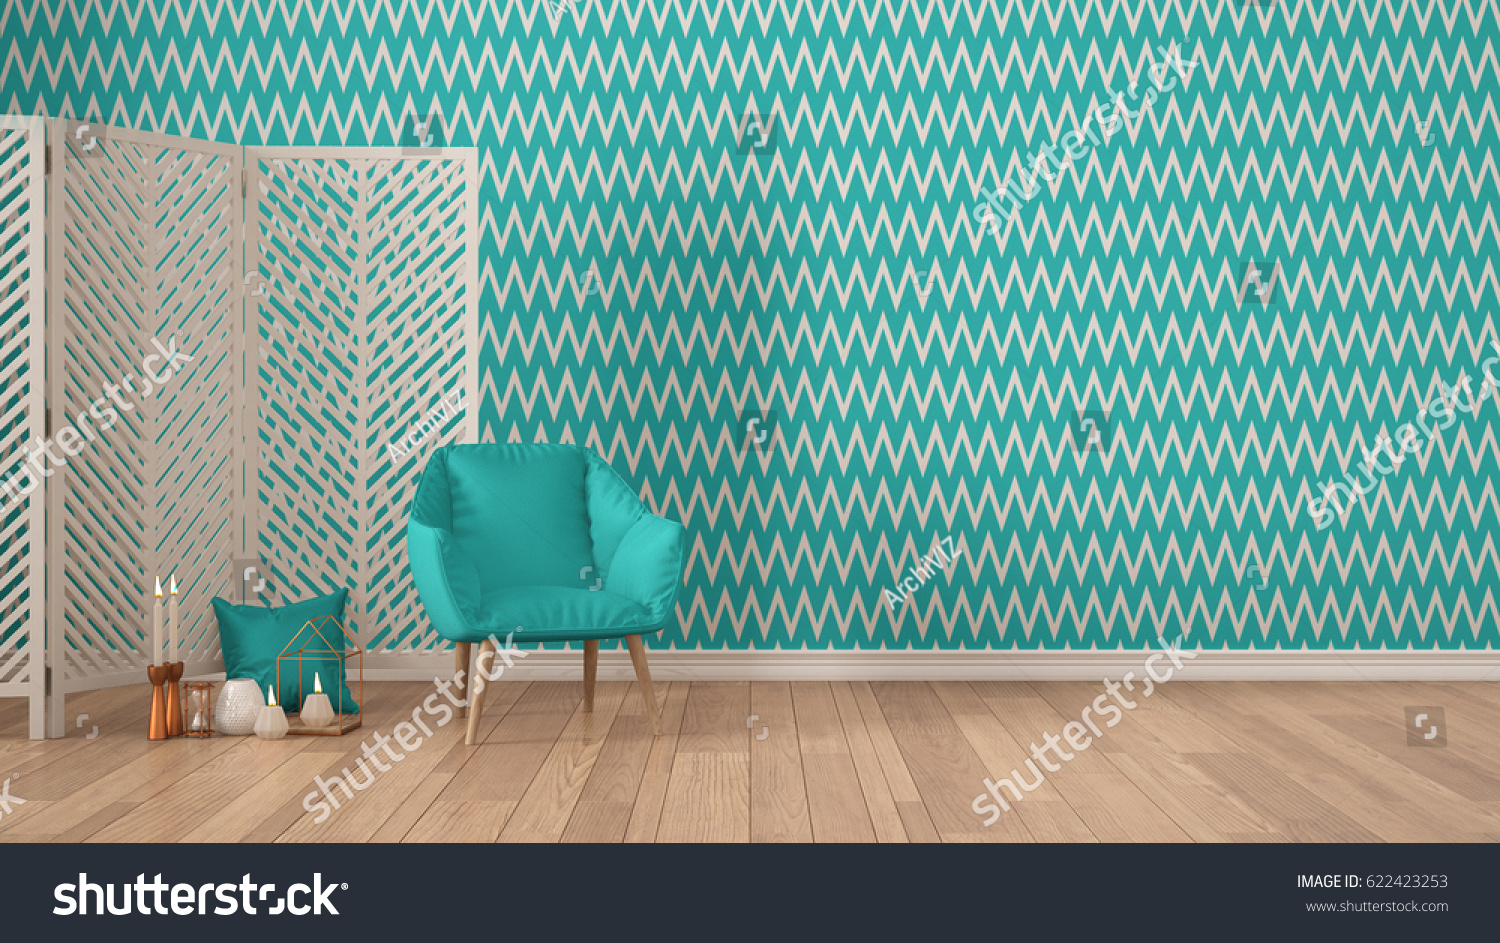 Scandinavian minimalist colorful background with armchair, screen, candles and decor on parquet flooring, turquoise herringbone wallpaper, living room interior design, 3d illustration